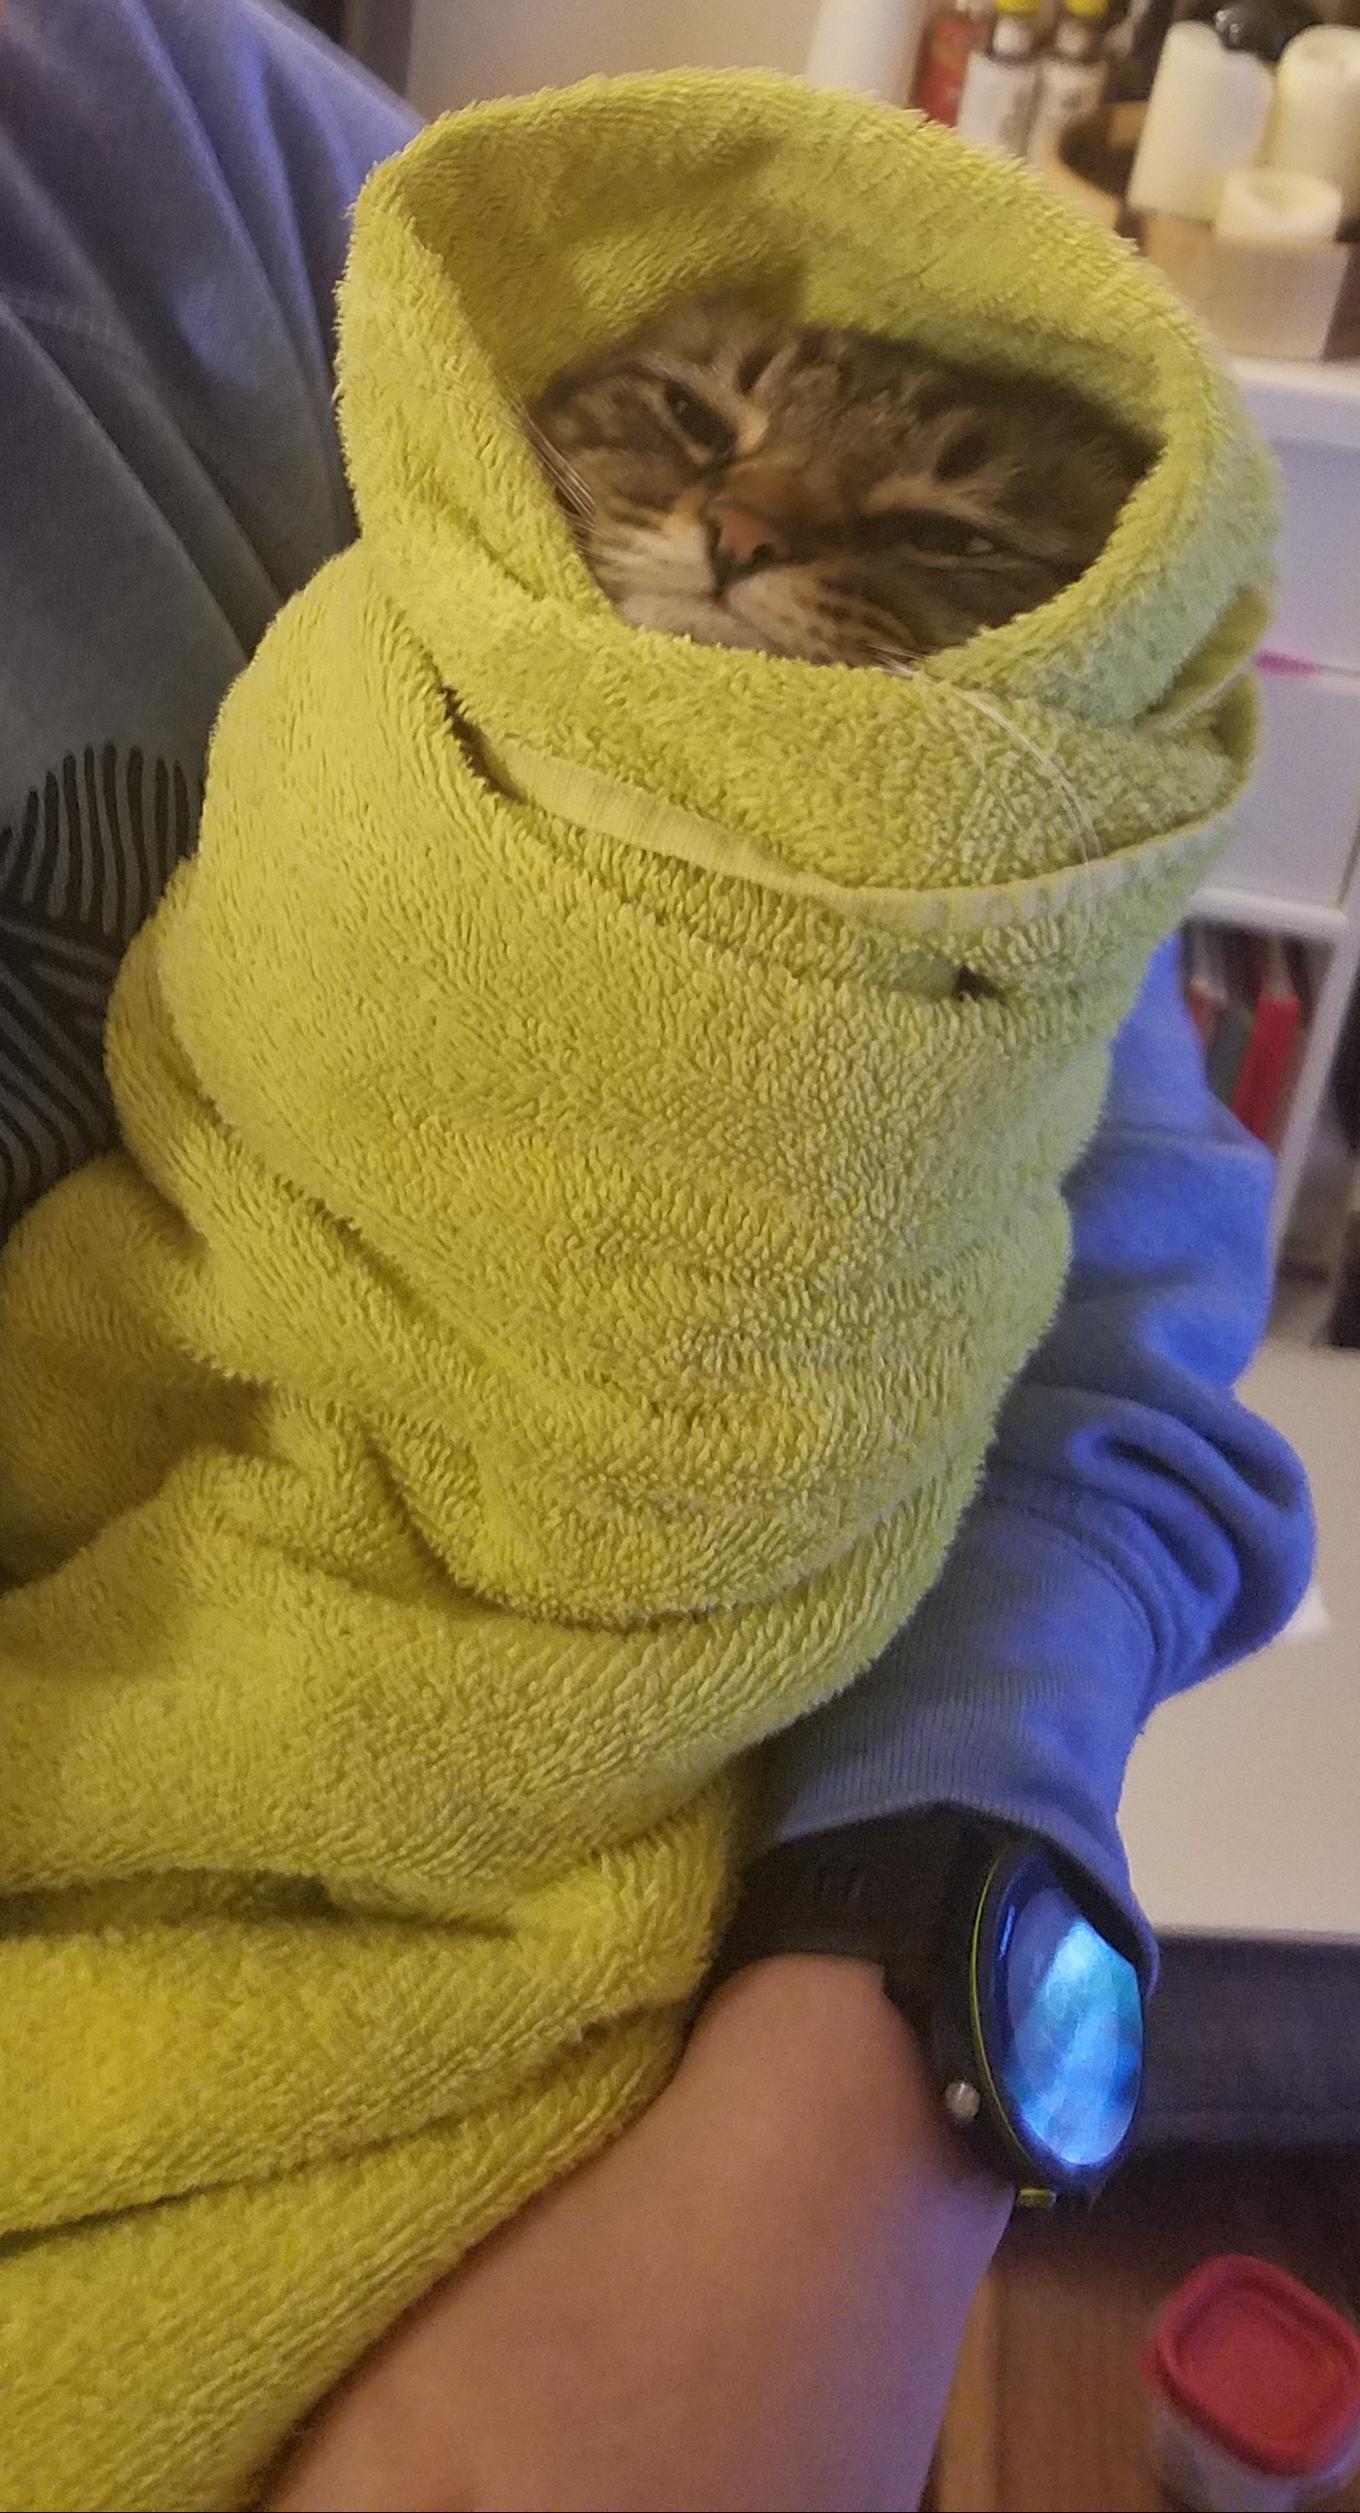 cat wrapped up in towel like a burrito